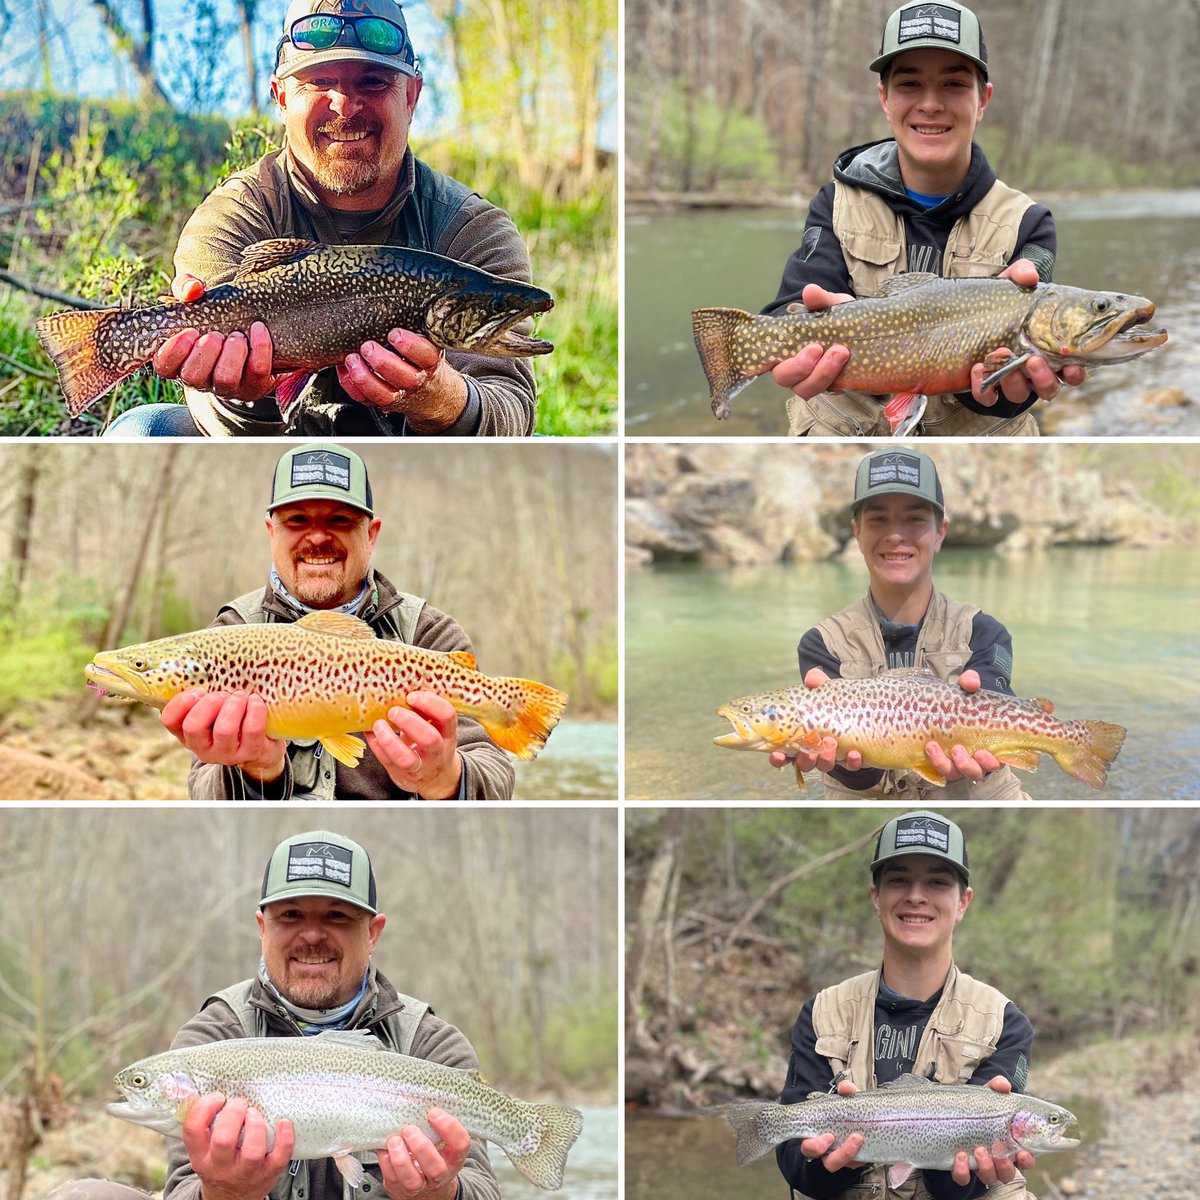 The trout slam (brook, brown, tiger, rainbow) for both of us with a fly rod in the same day! Nothing like a day in God’s country. Happy birthday to the young man who teaches me as much as I teach him. #outdoorfamily #getupland